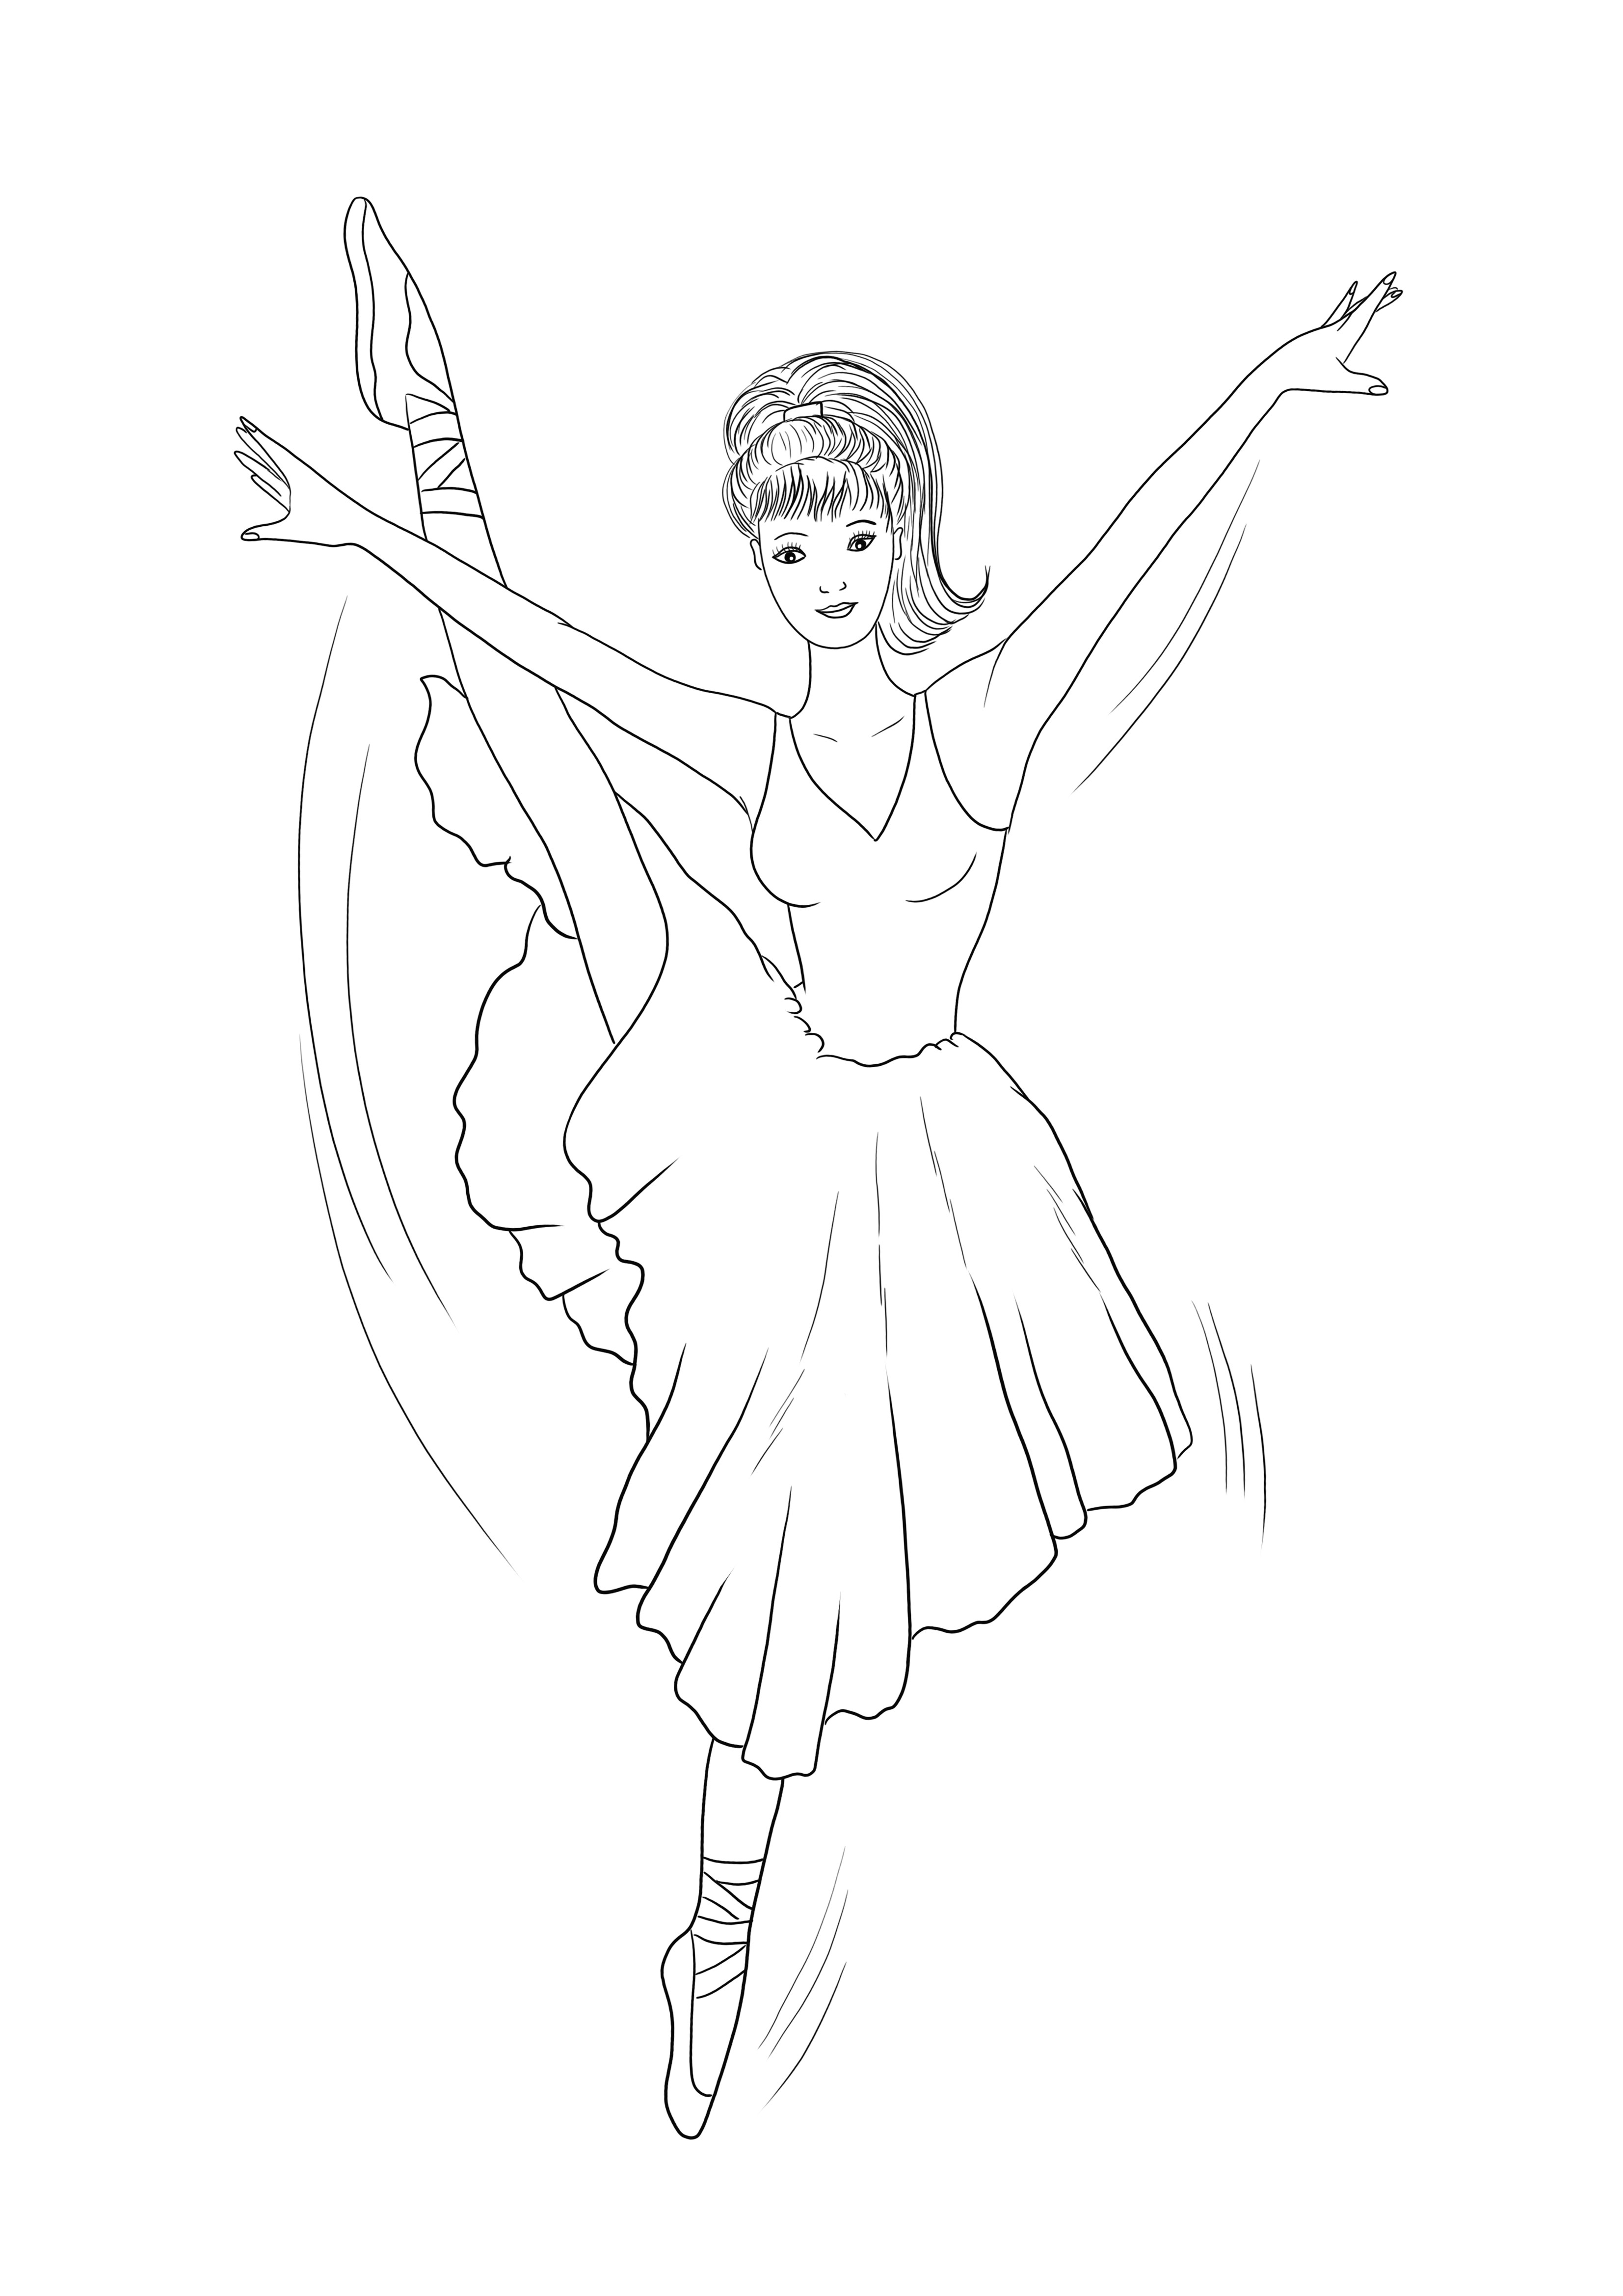 Coloring image of a Barbie Ballerina toy free to download or print